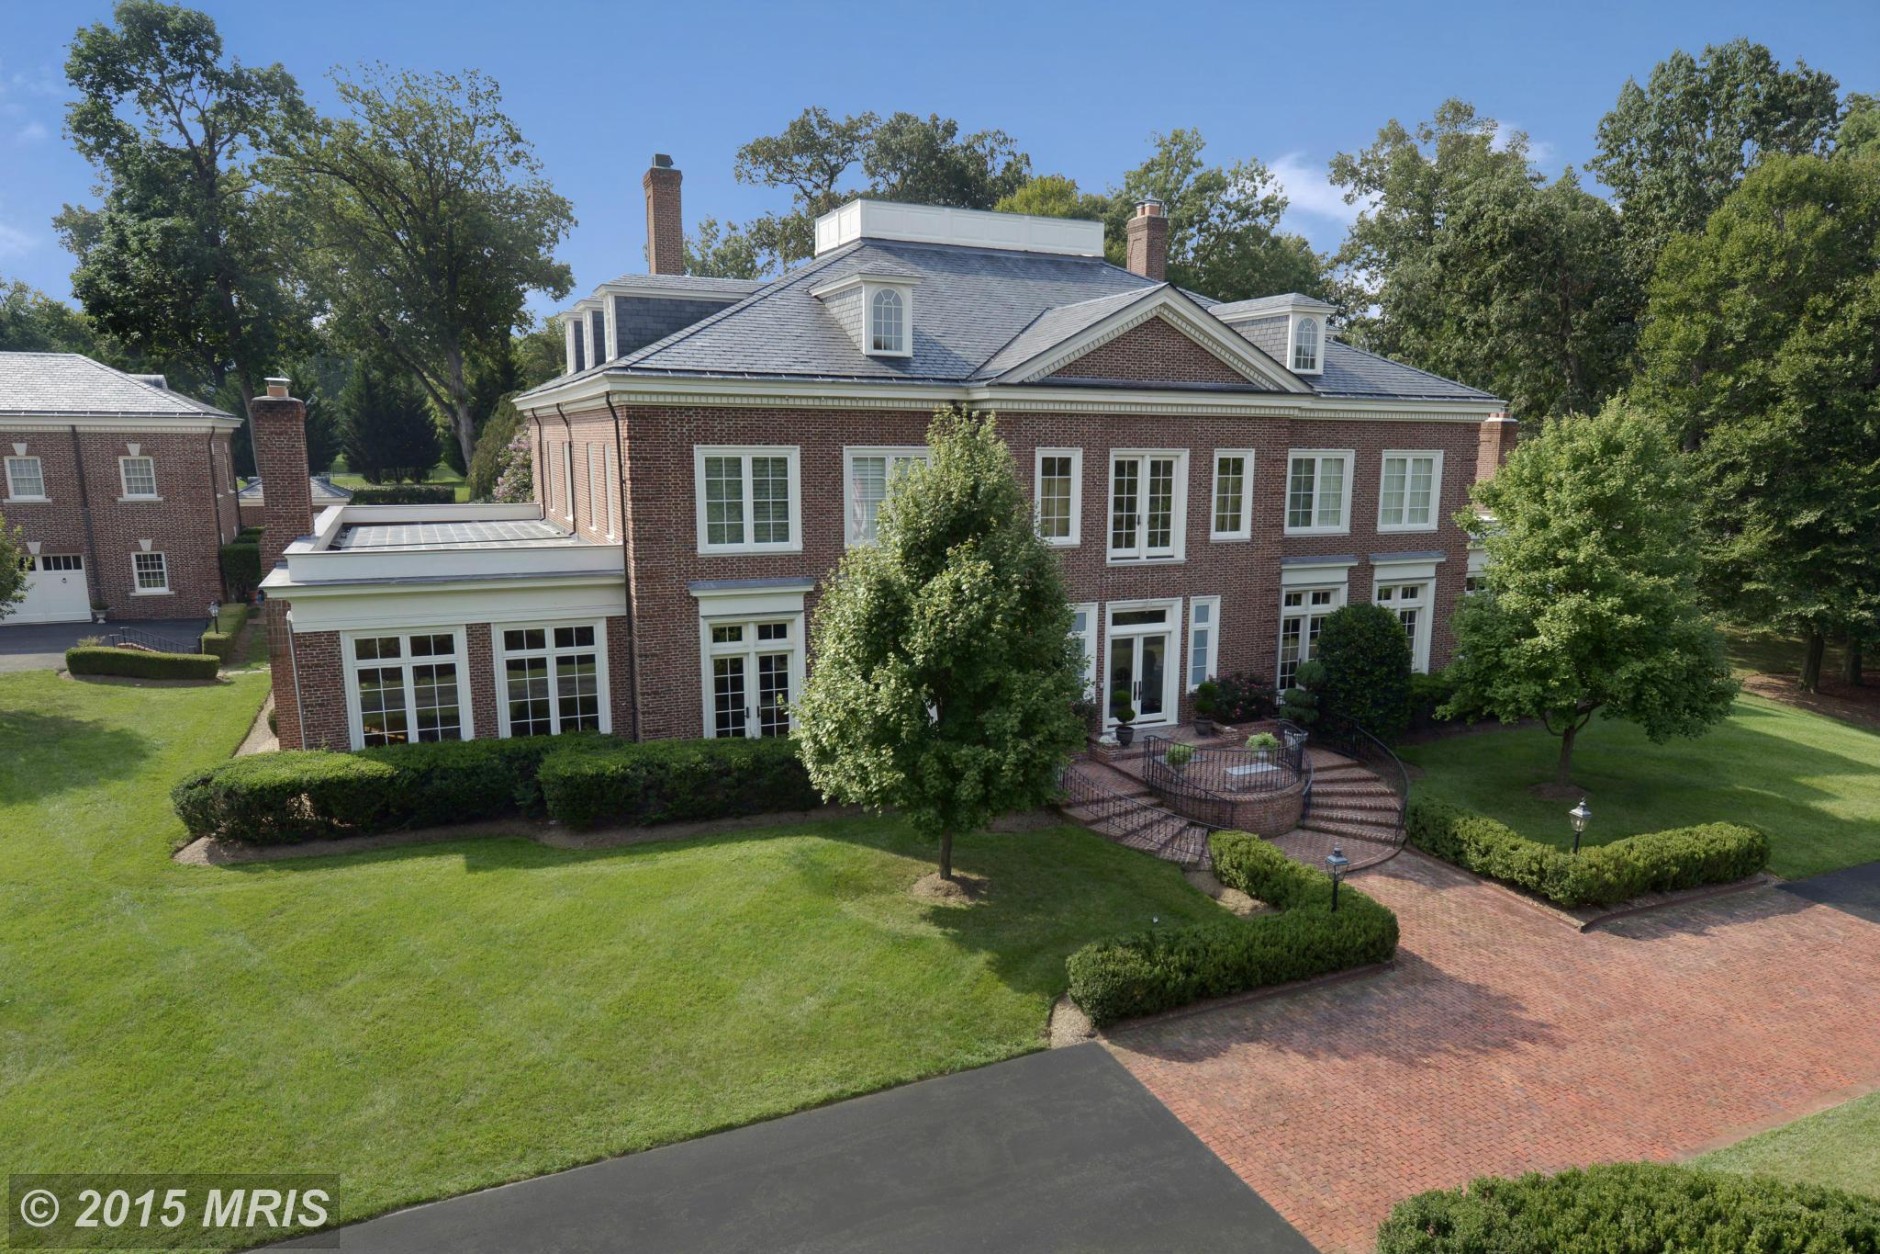 #5. This home, located at 11100 Cripplegate Road, Potomac, Maryland, sold for $6.15 million. (Metropolitan Regional Information Systems, Inc./Metropolitan Regional Information Systems, Inc.)